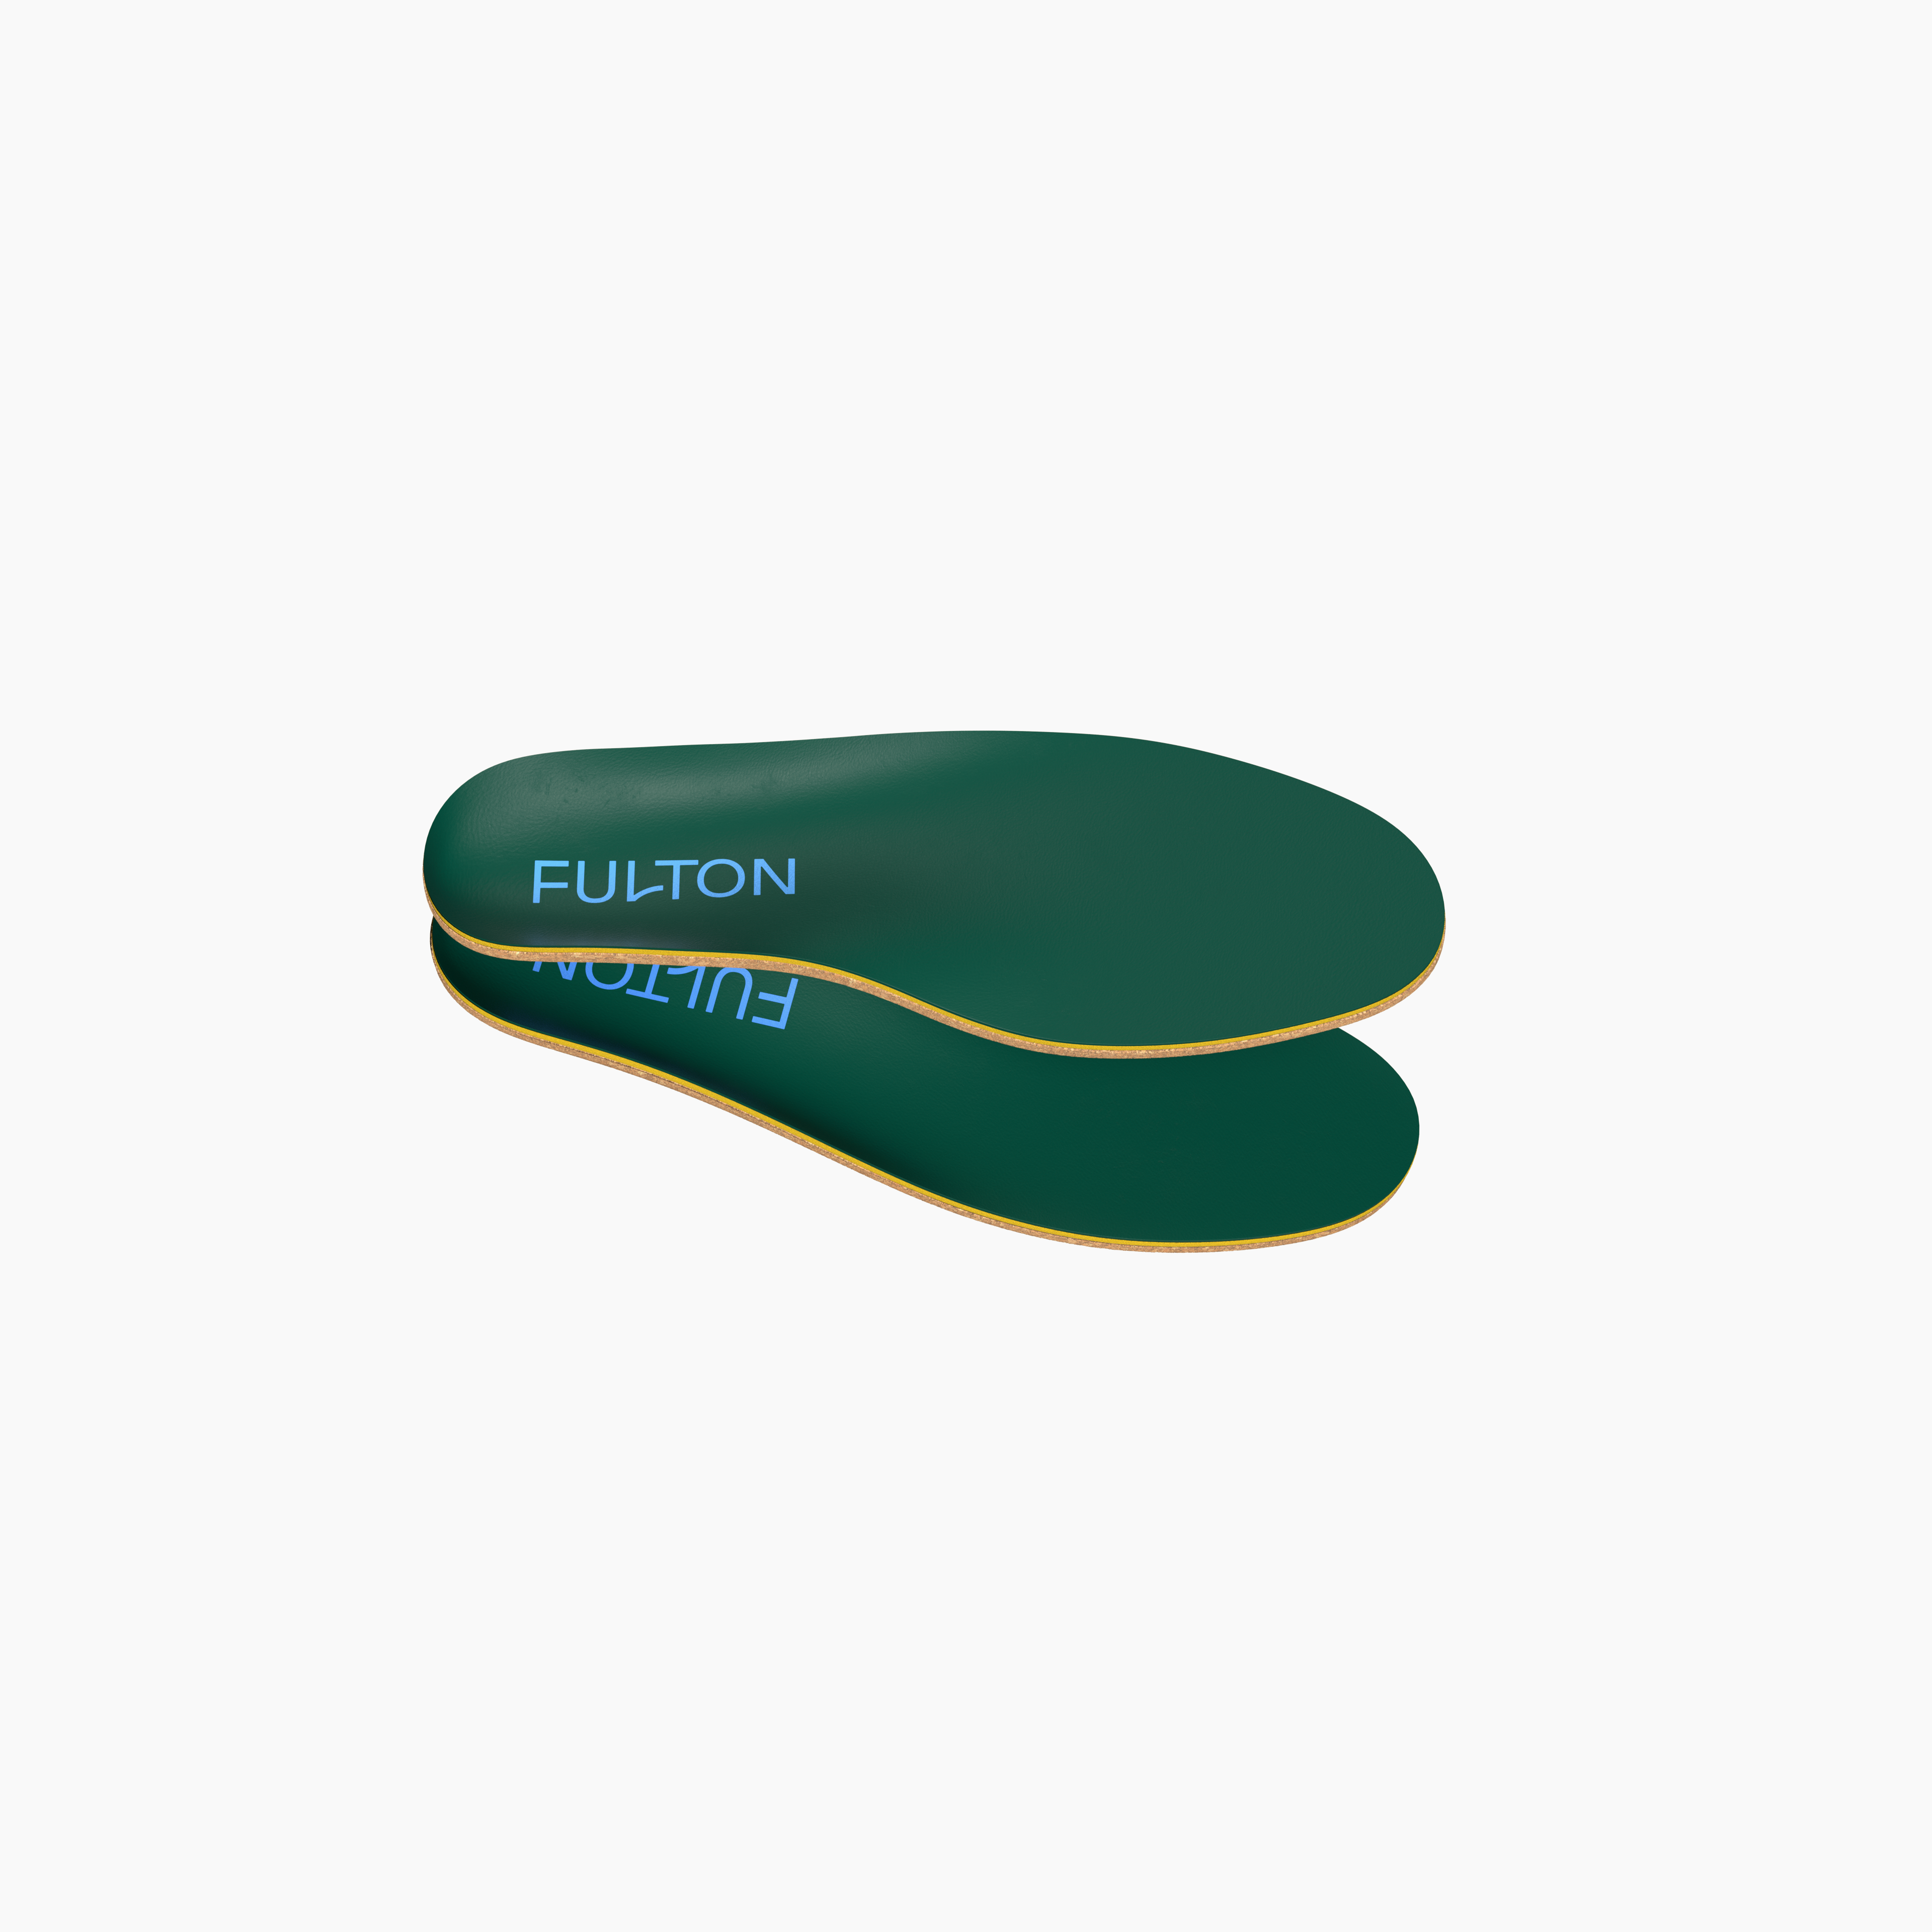 The Classic Insole